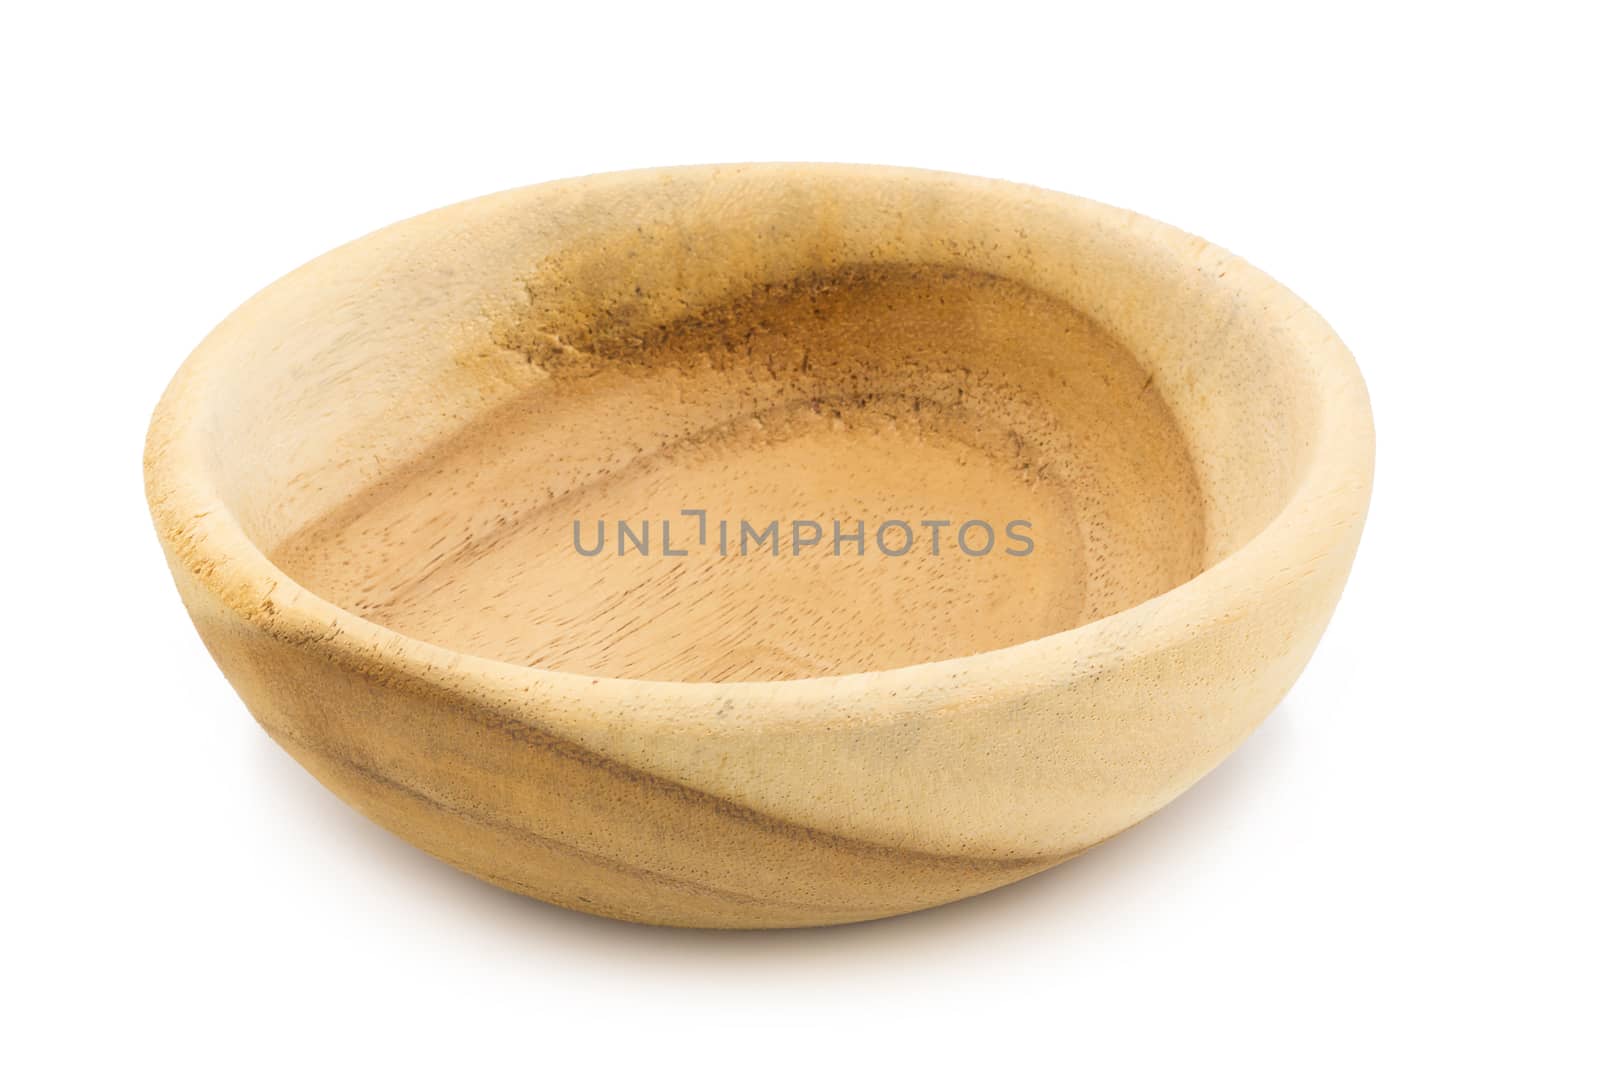 Empty wooden bowl isolated on white background.